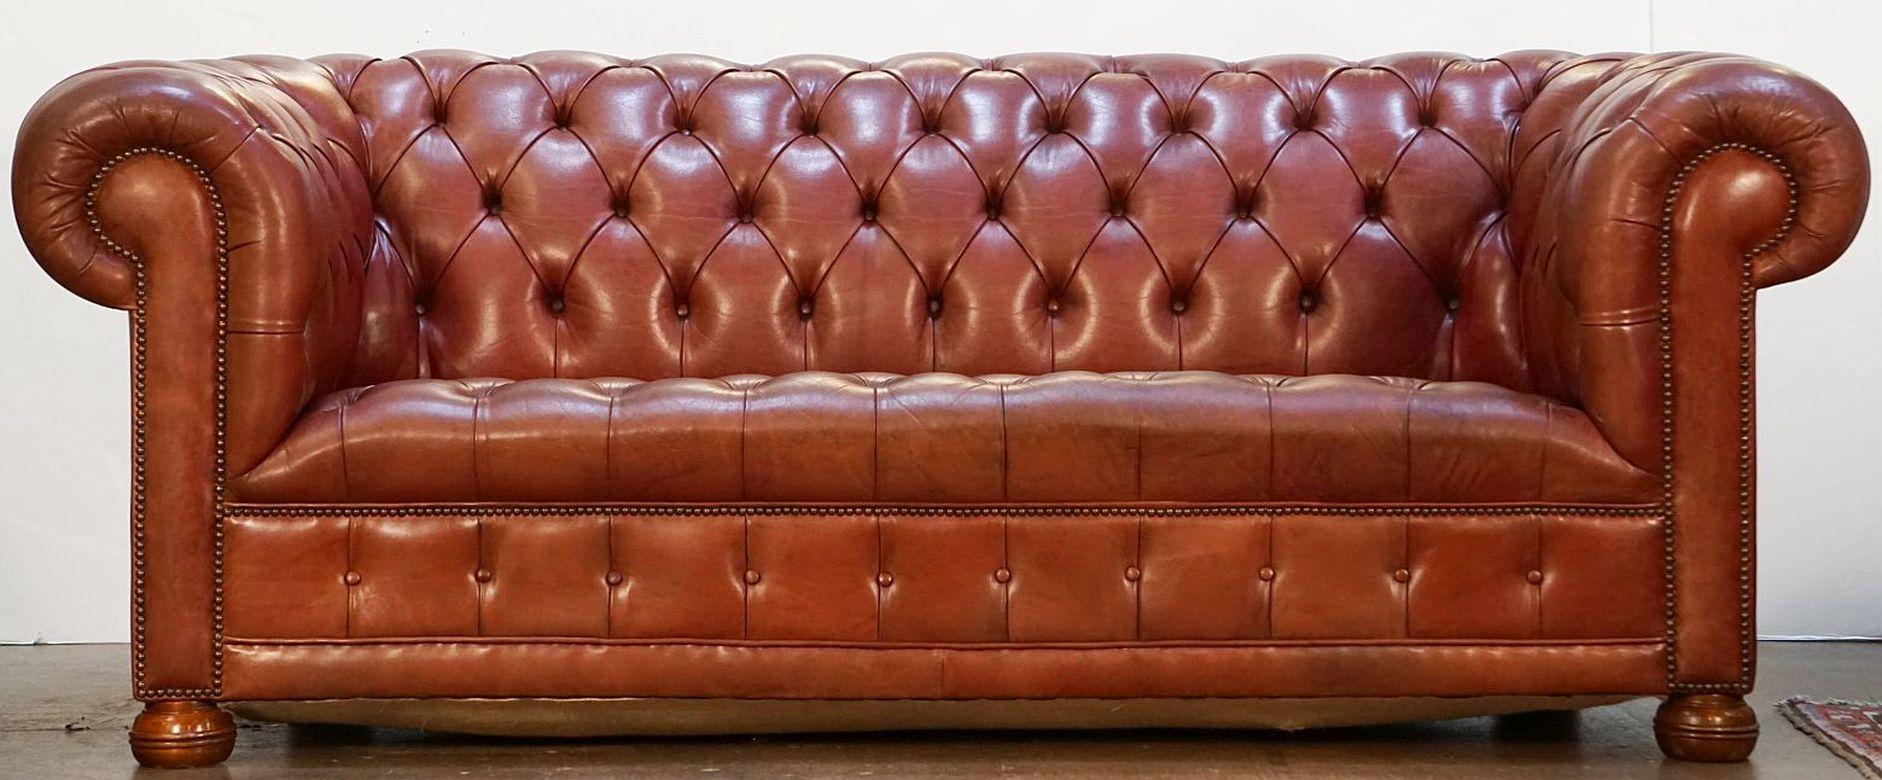 Turned  Large English Chesterfield Sofa of Tufted Leather